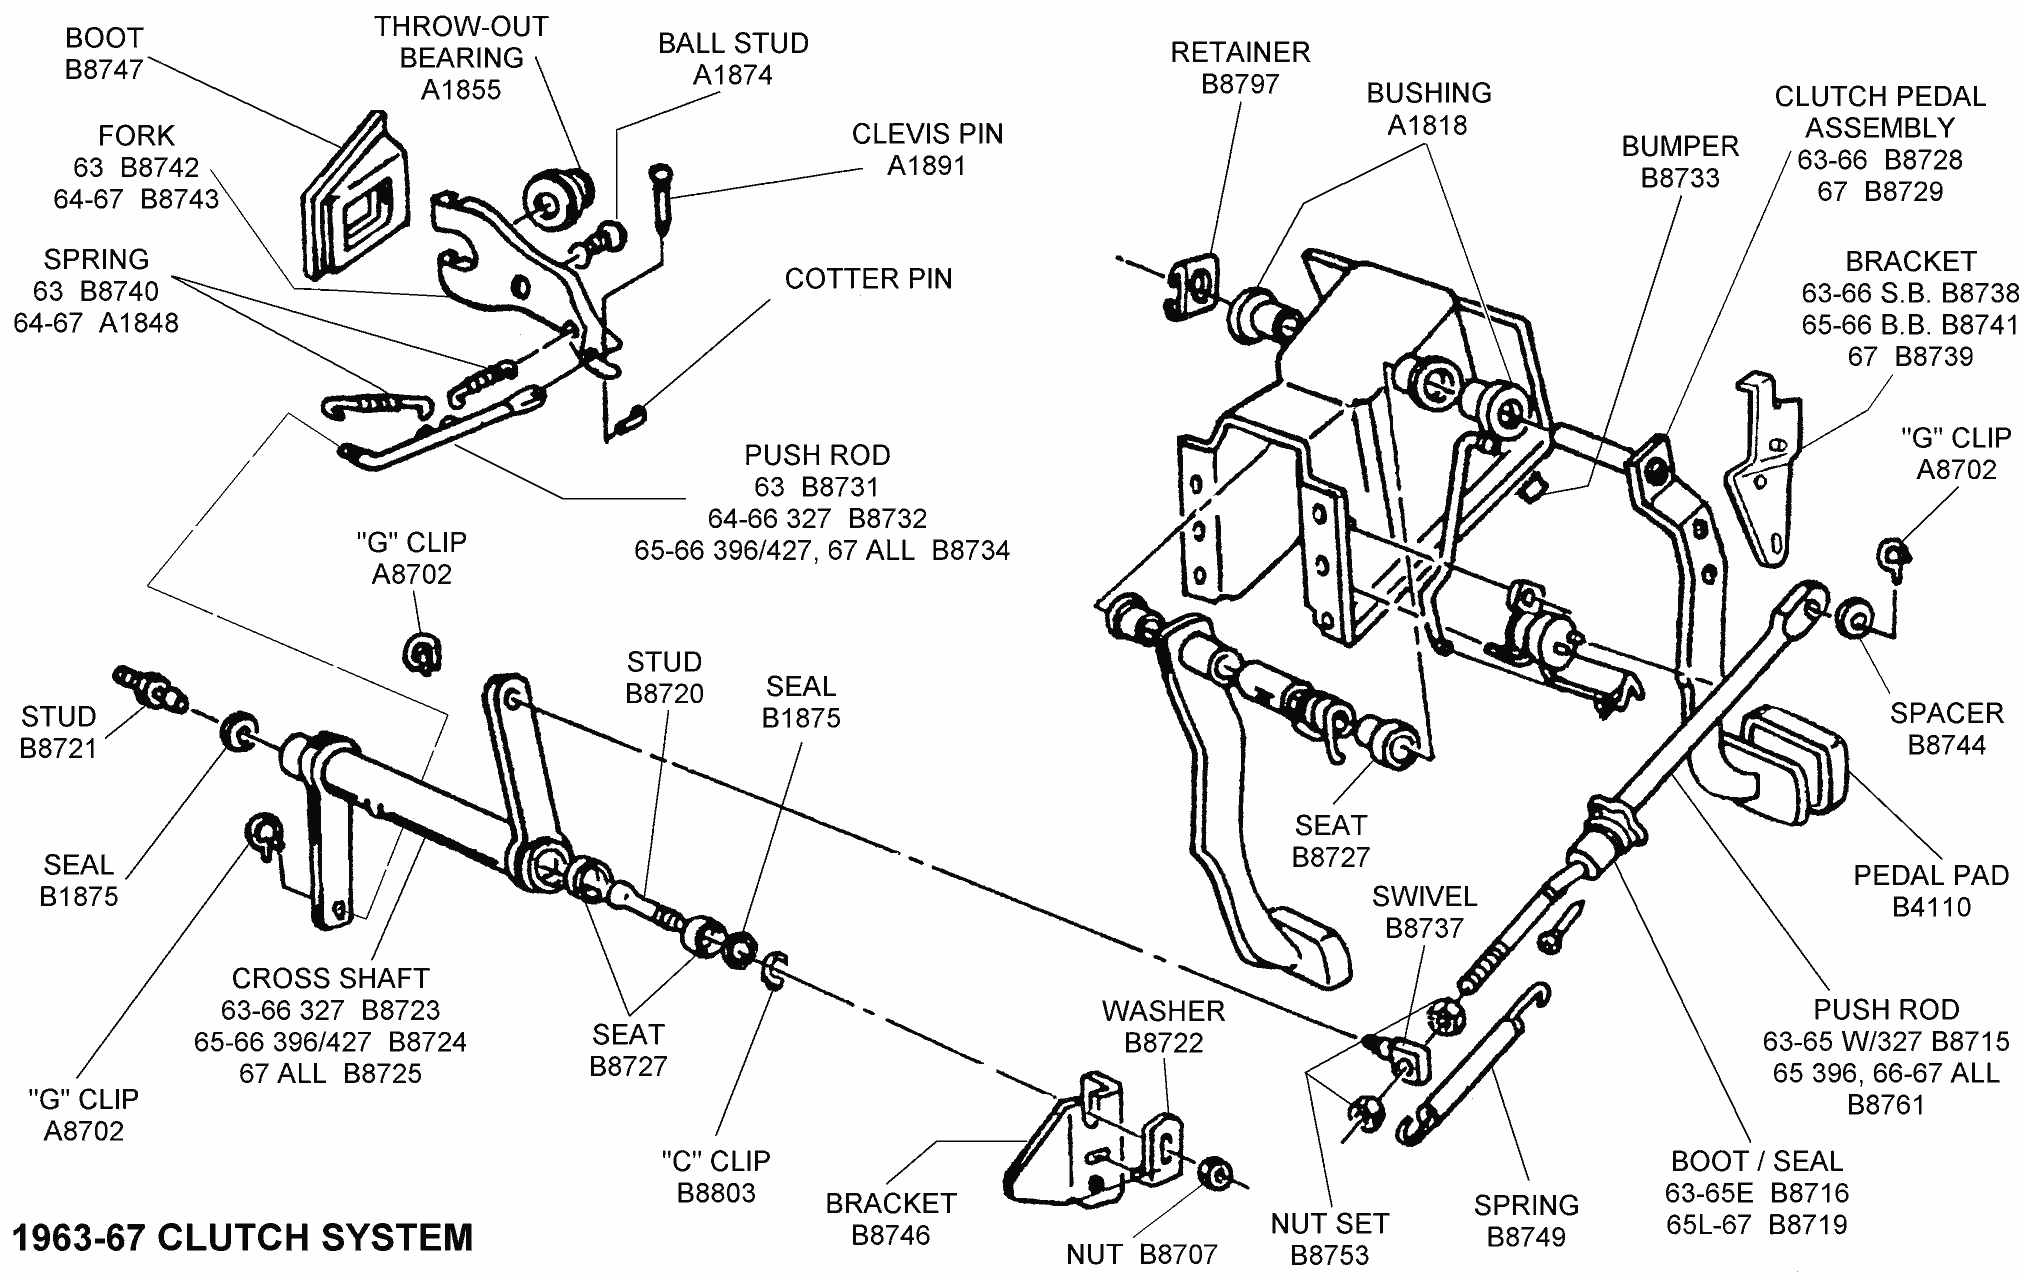 1963-67 Clutch System - Diagram View - Chicago Corvette Supply 1973 ford maverick wiring diagram 